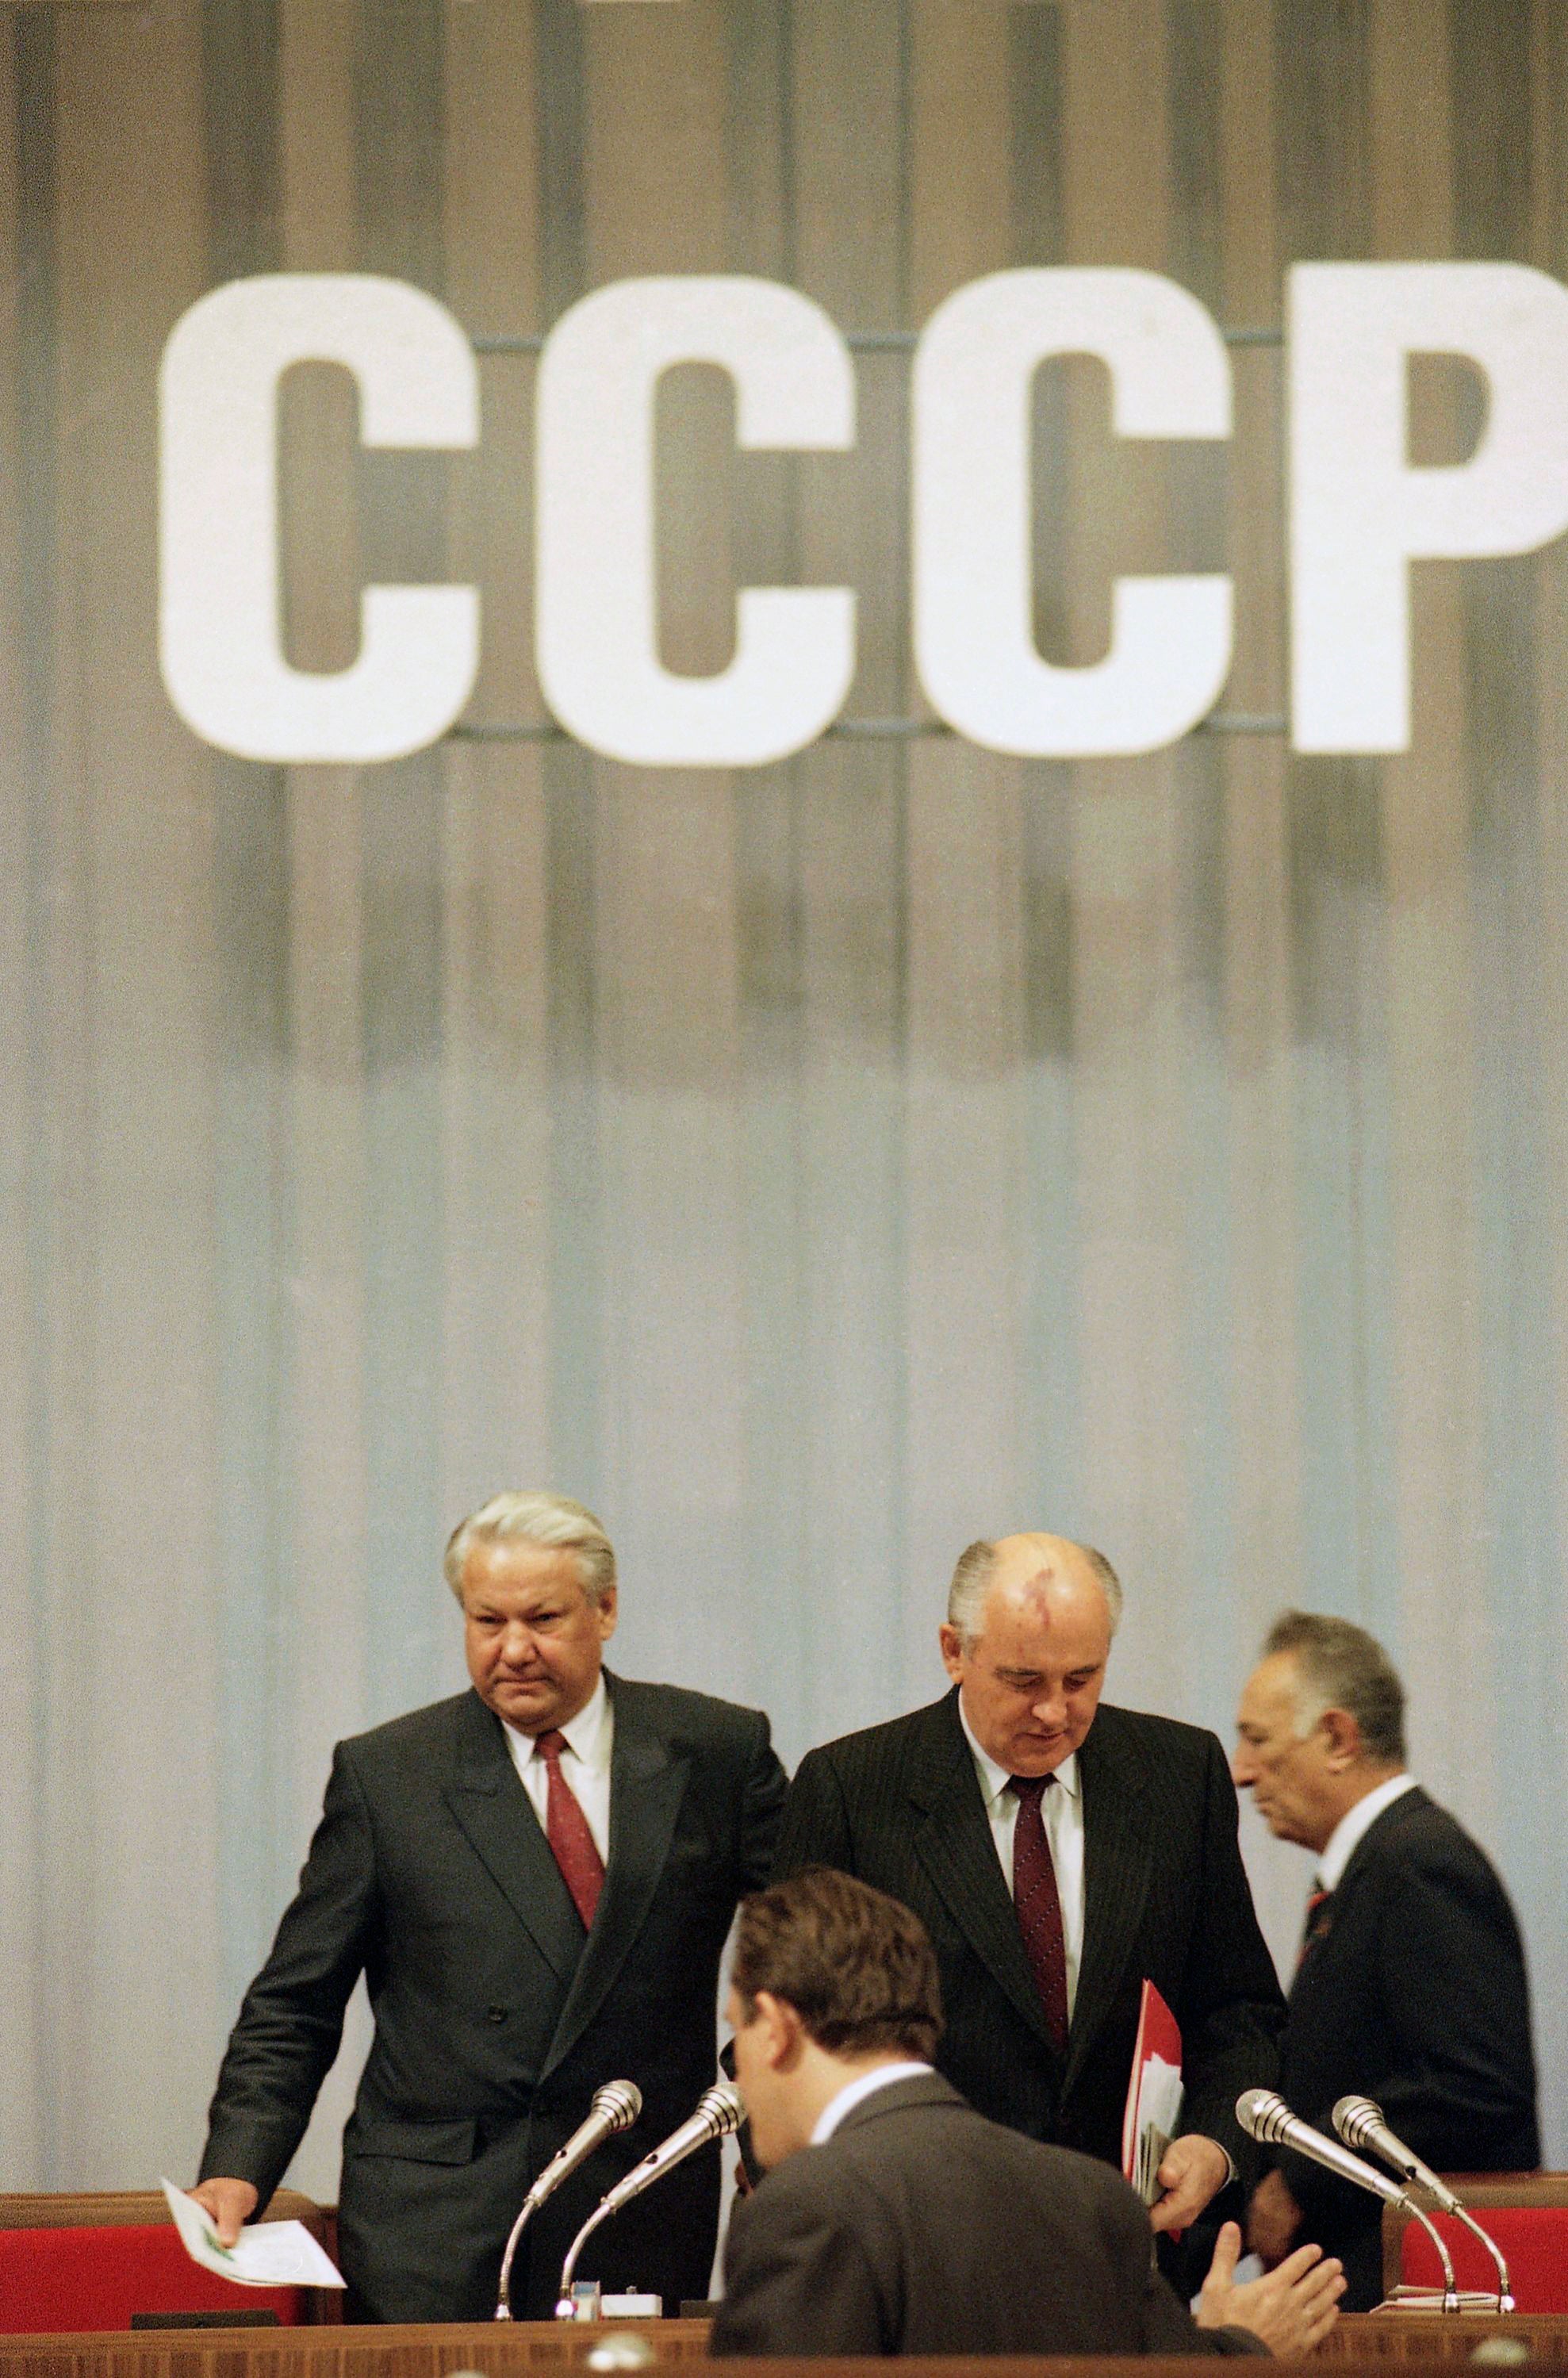 President of the Russian Federation Boris Yeltsin, left, and Soviet President Mikhail Gorbachev enter the podium at the start of the closing session of the Congress of People in Moscow, Russia on Thursday, Sept. 5, 1991